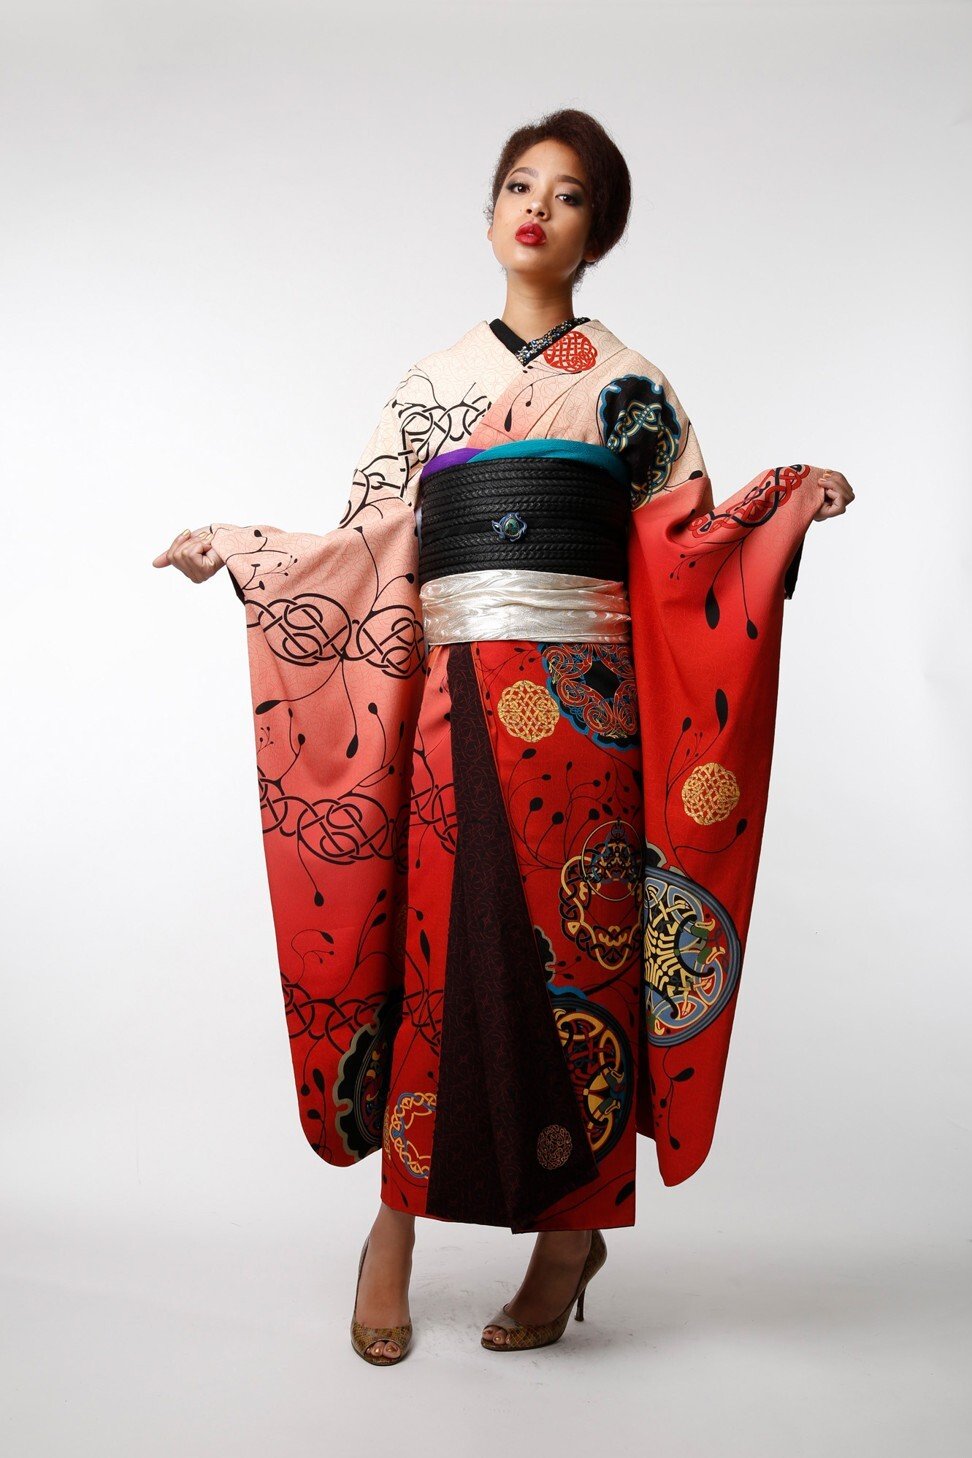 How this Japanese atelier is reinventing the kimono for the modern